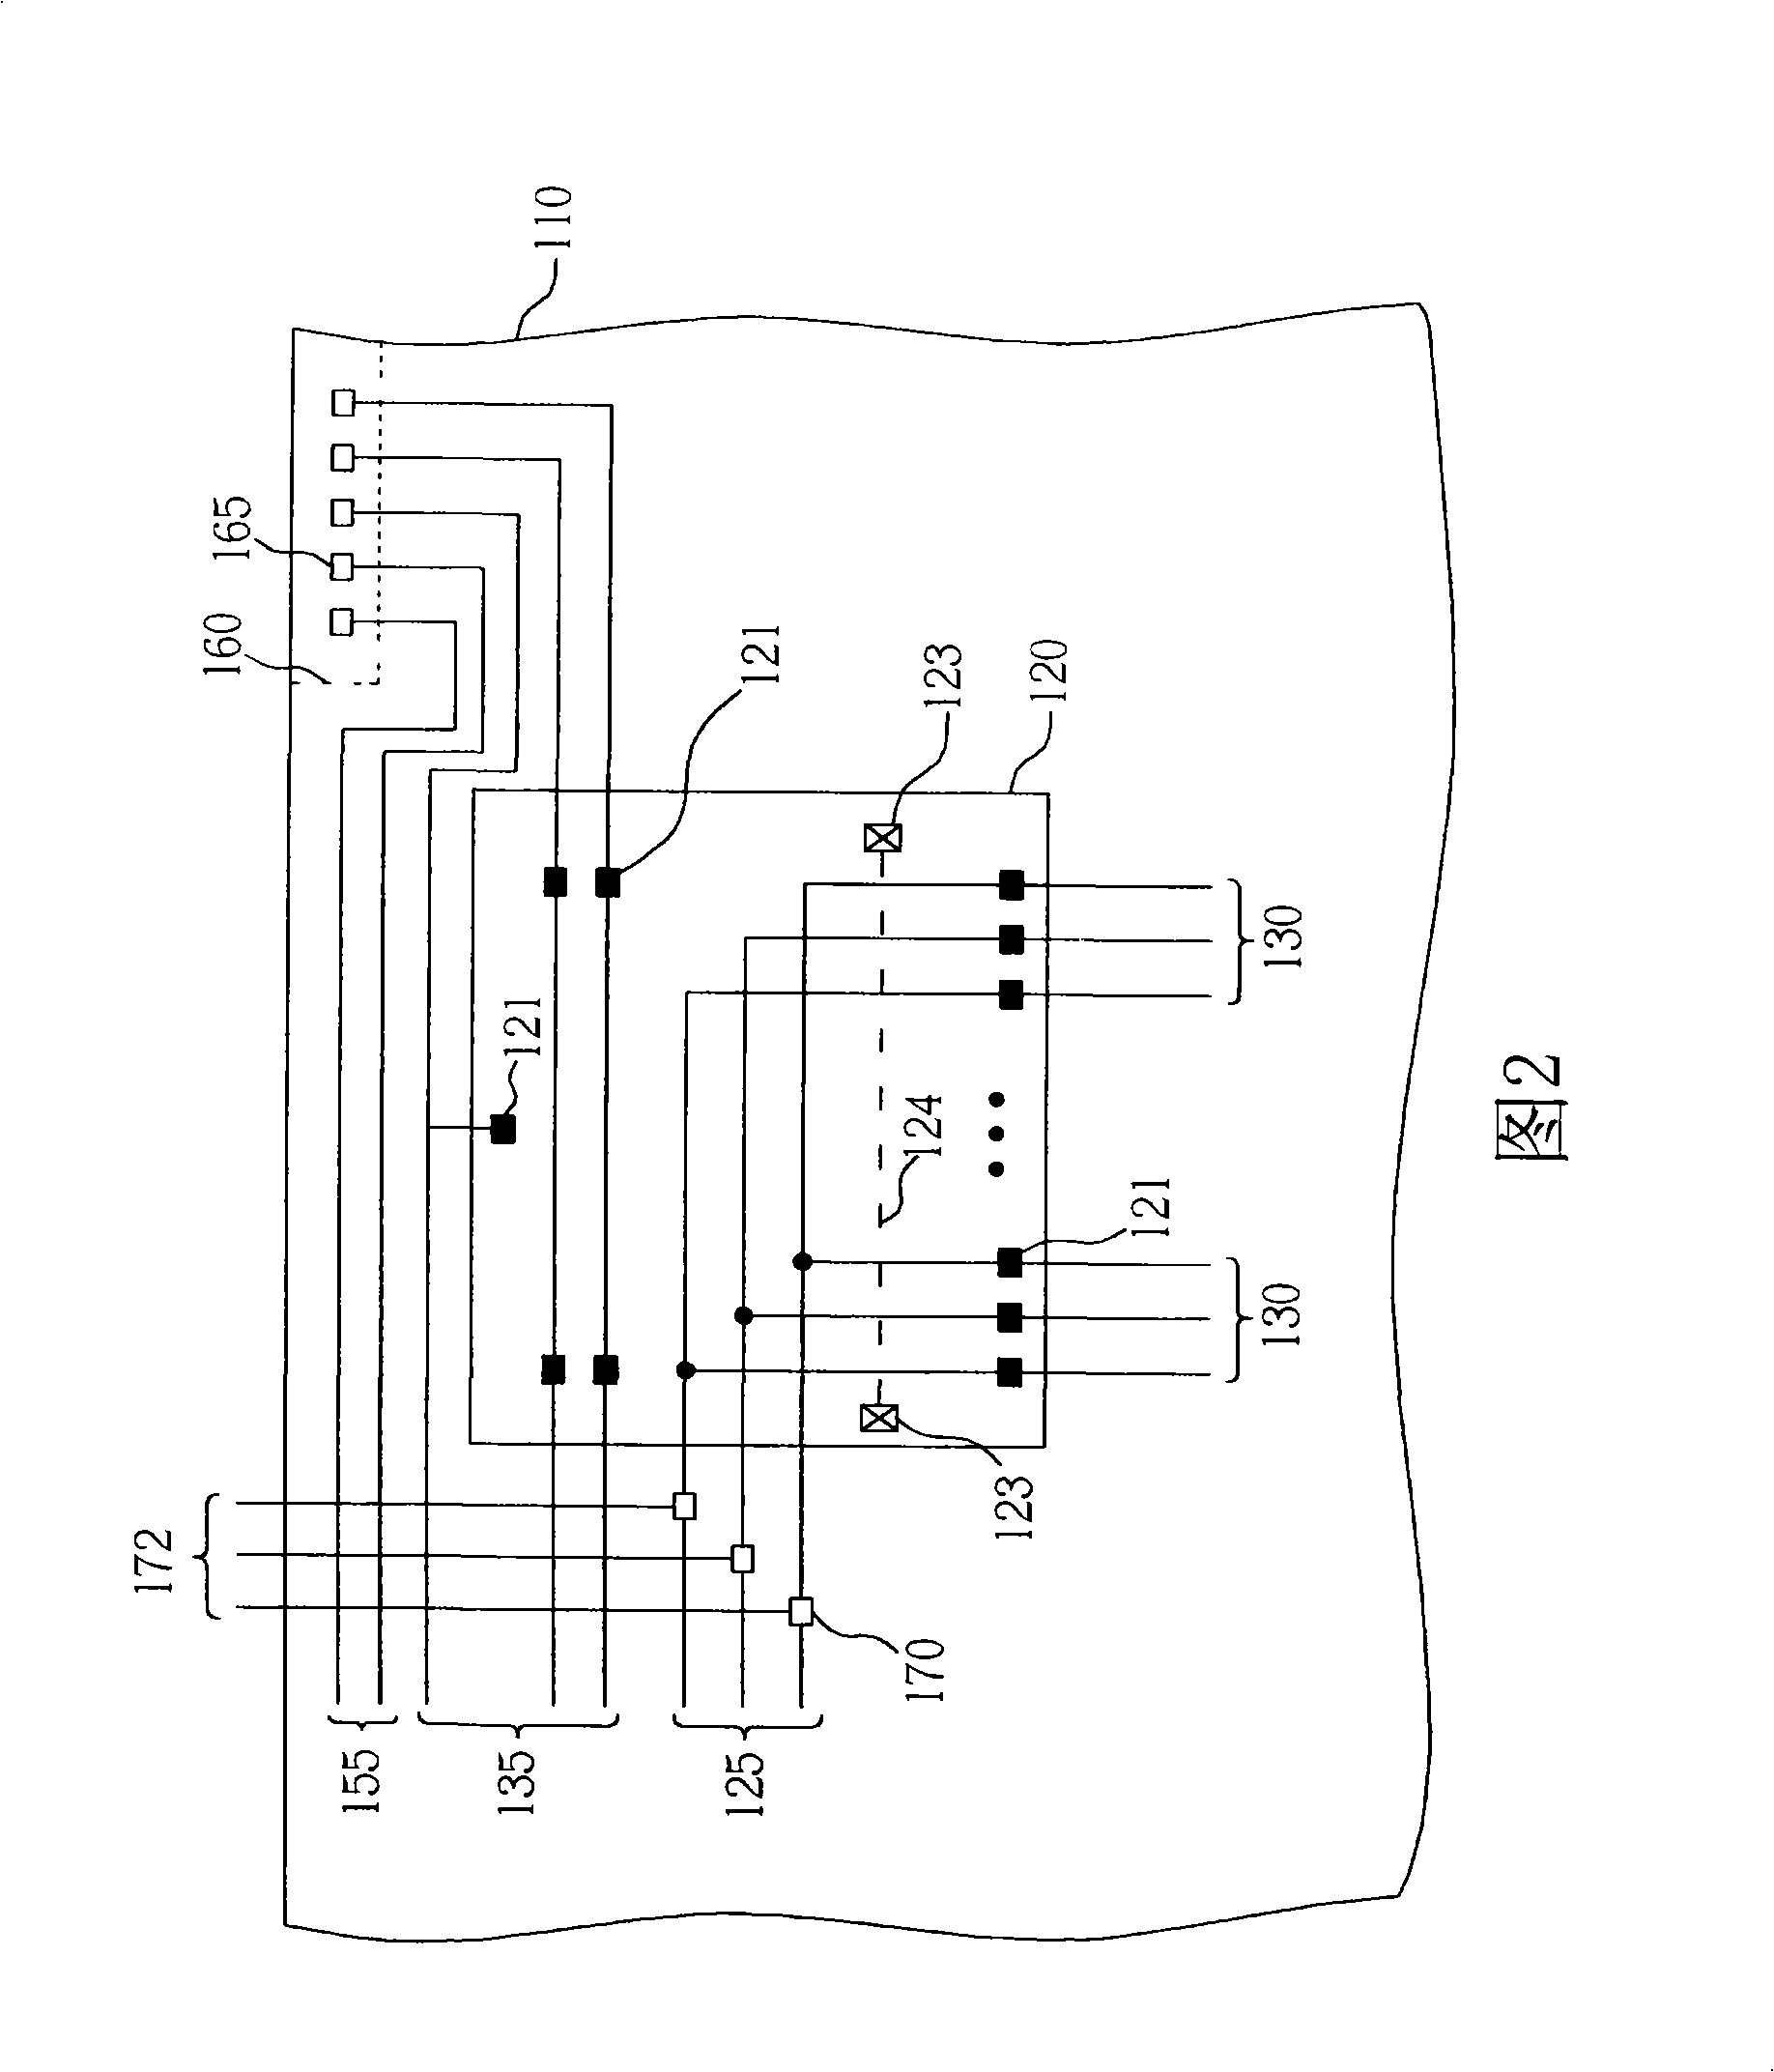 Flat display device with test structure